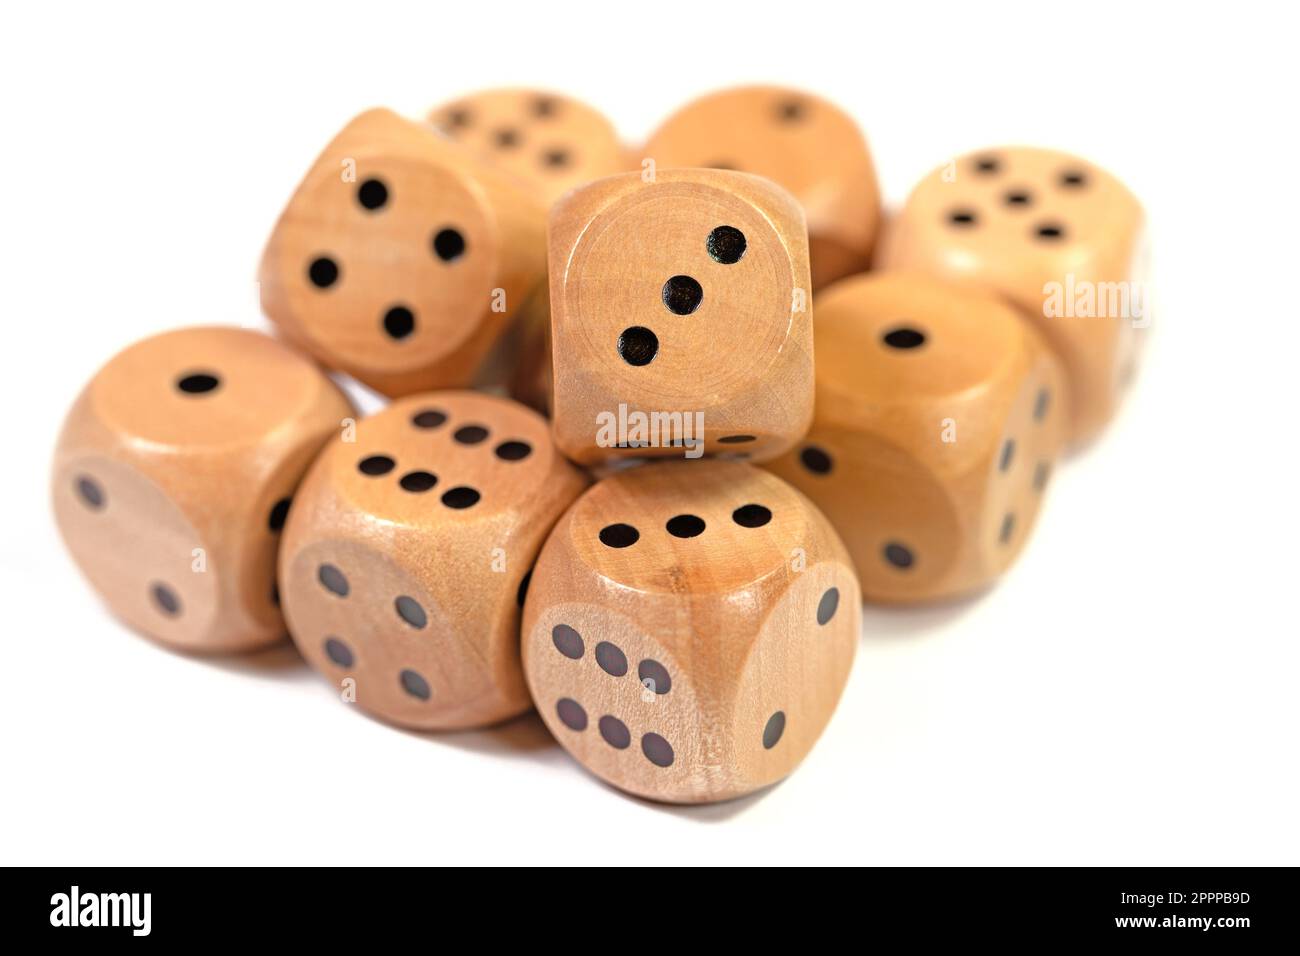 Wooden game cubes against white background Stock Photo